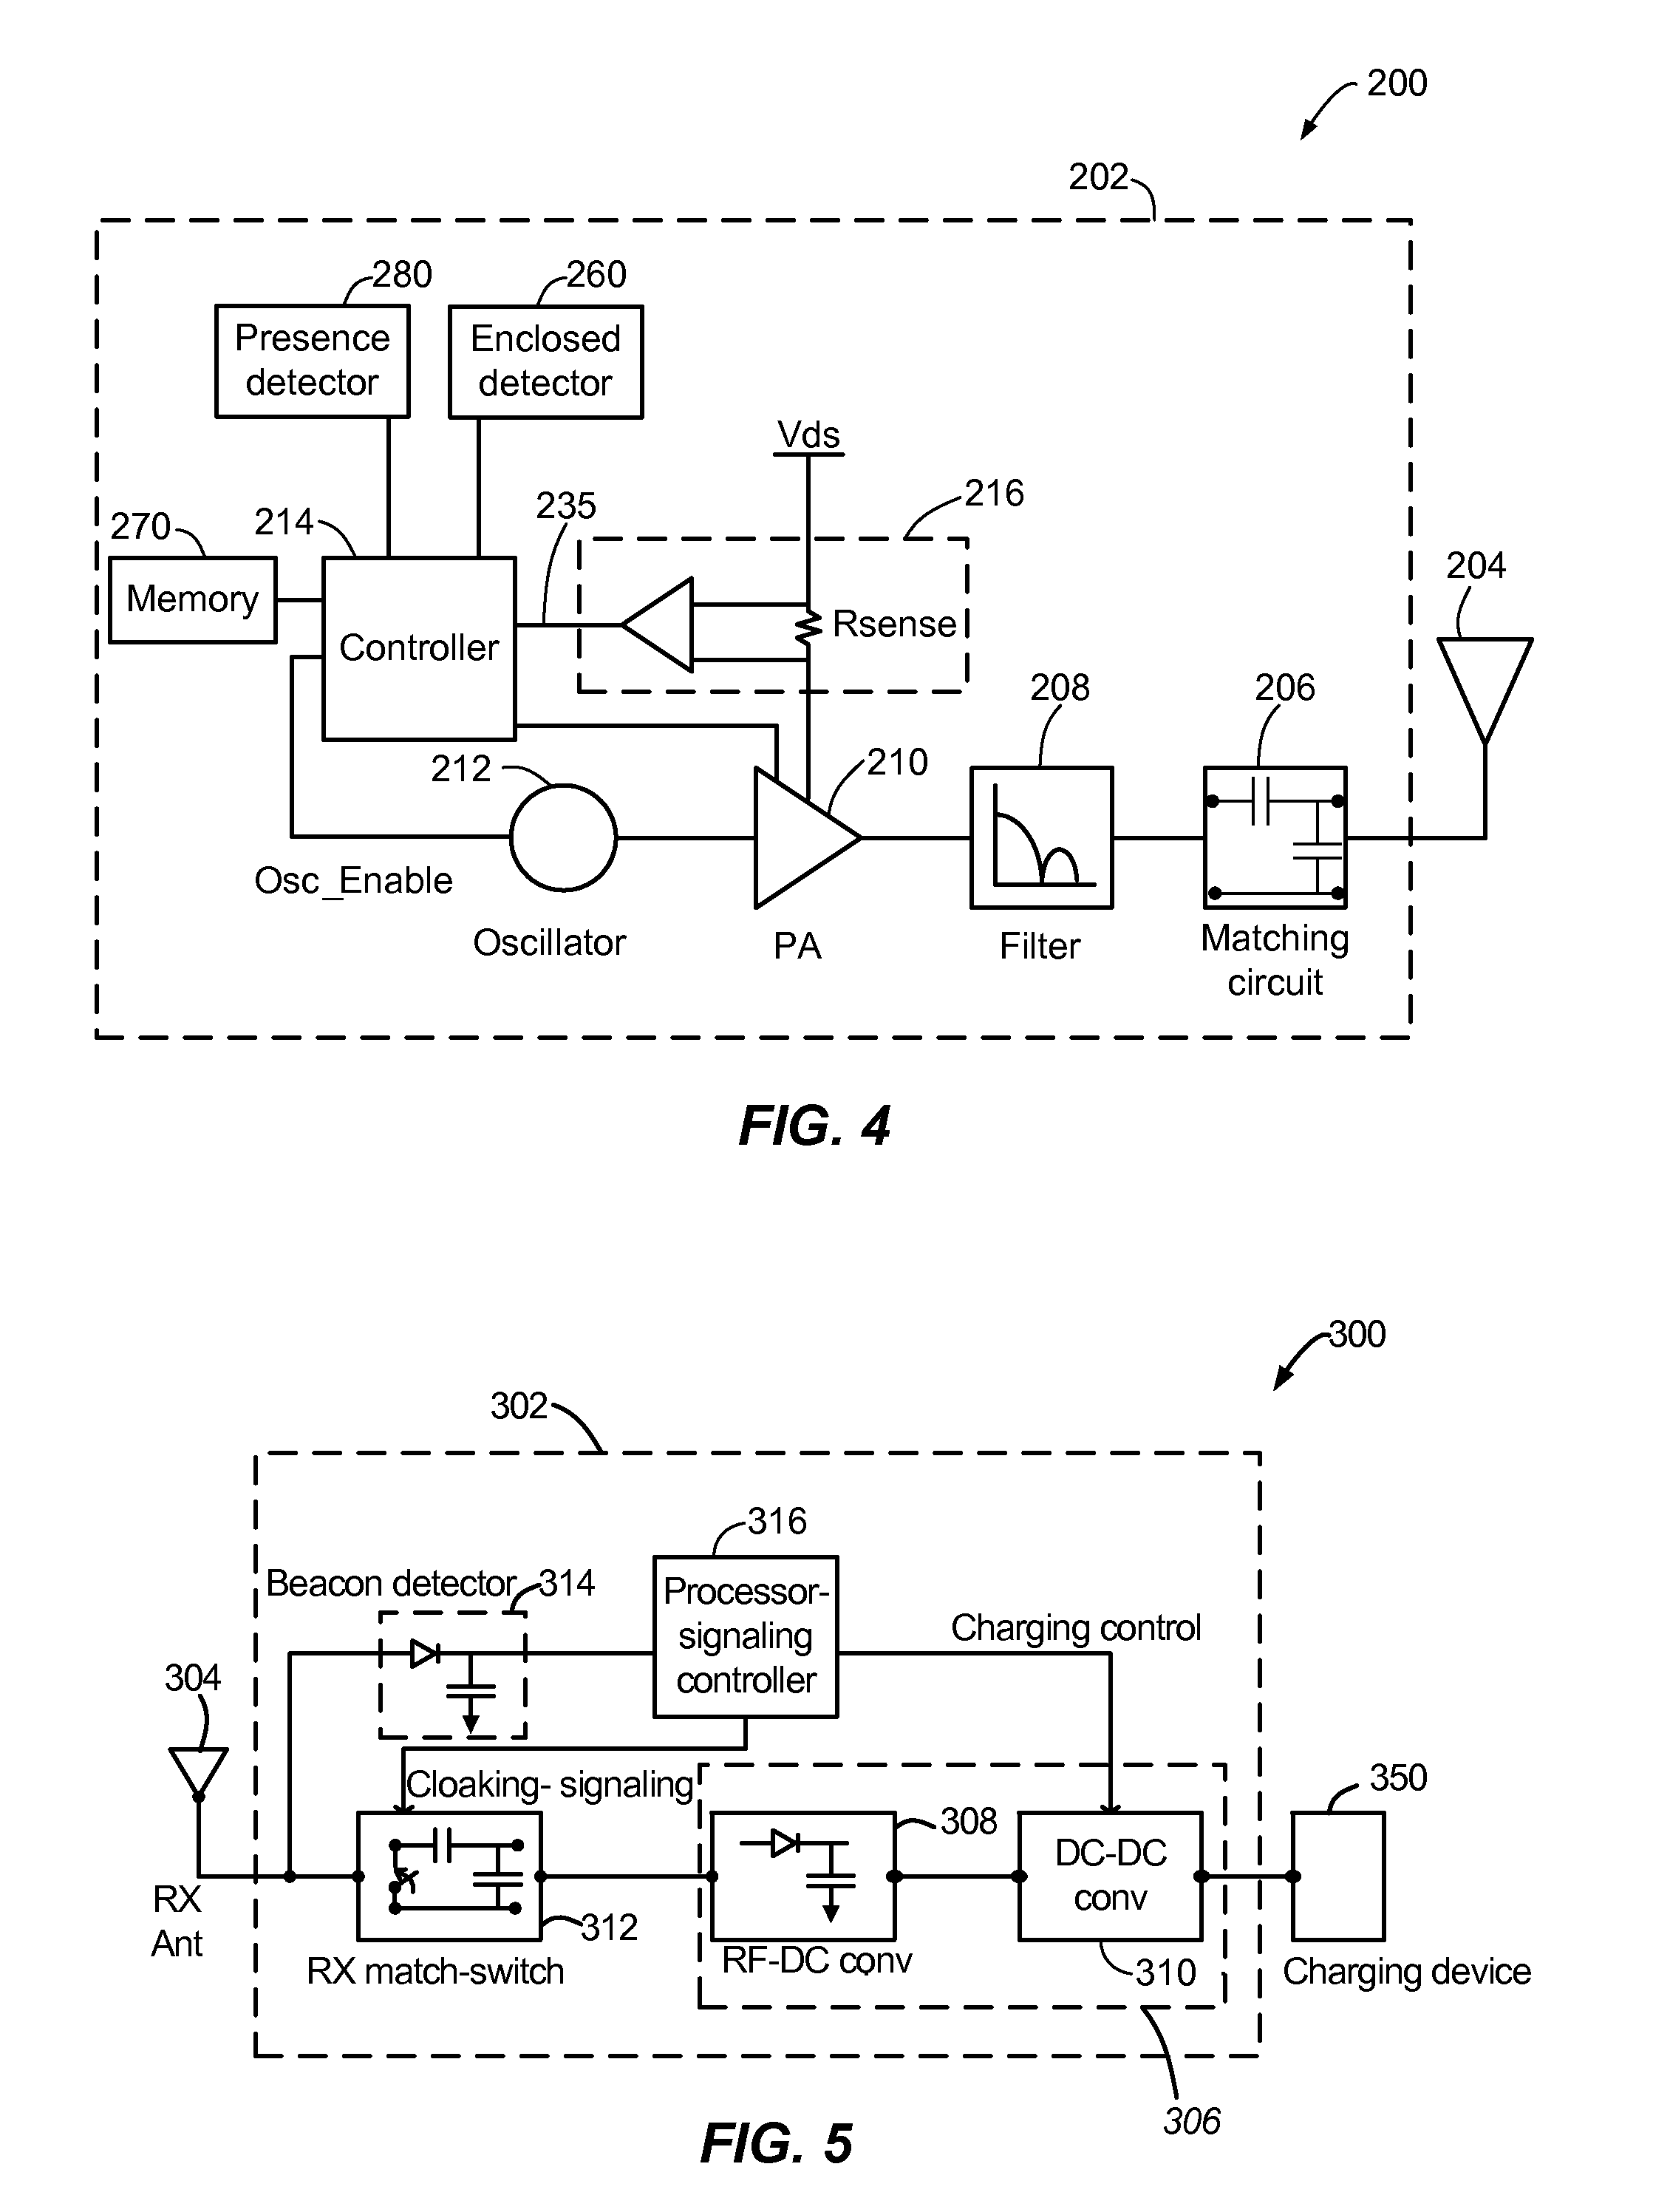 Detection and protection of devices within a wireless power system